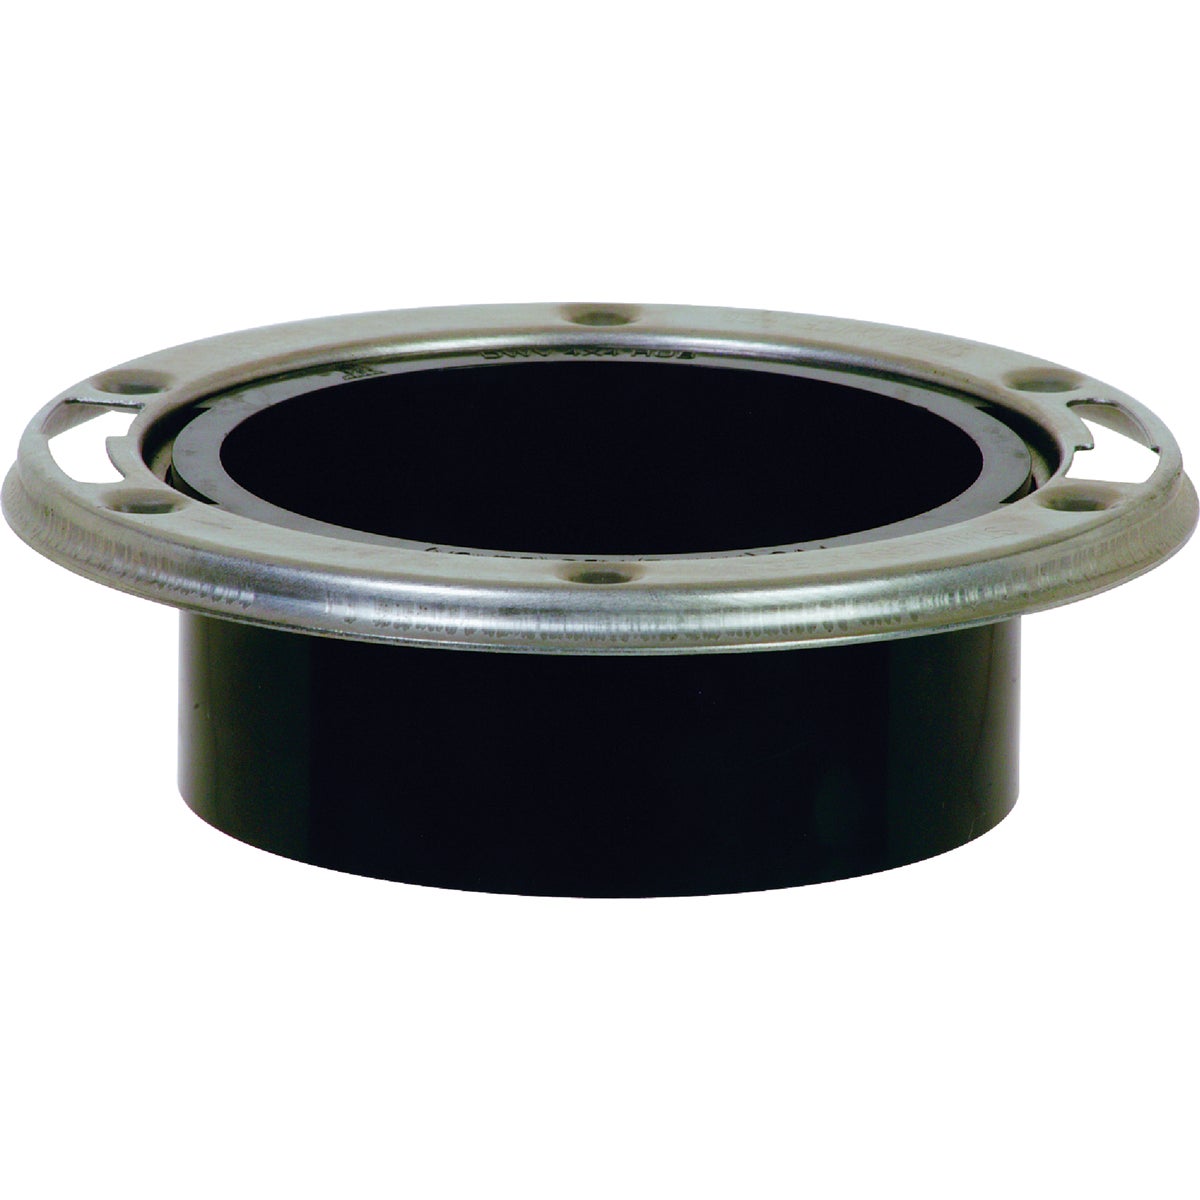 Item 436070, 4 x 3 ABS closet flange with stainless steel flush to floor swivel ring.